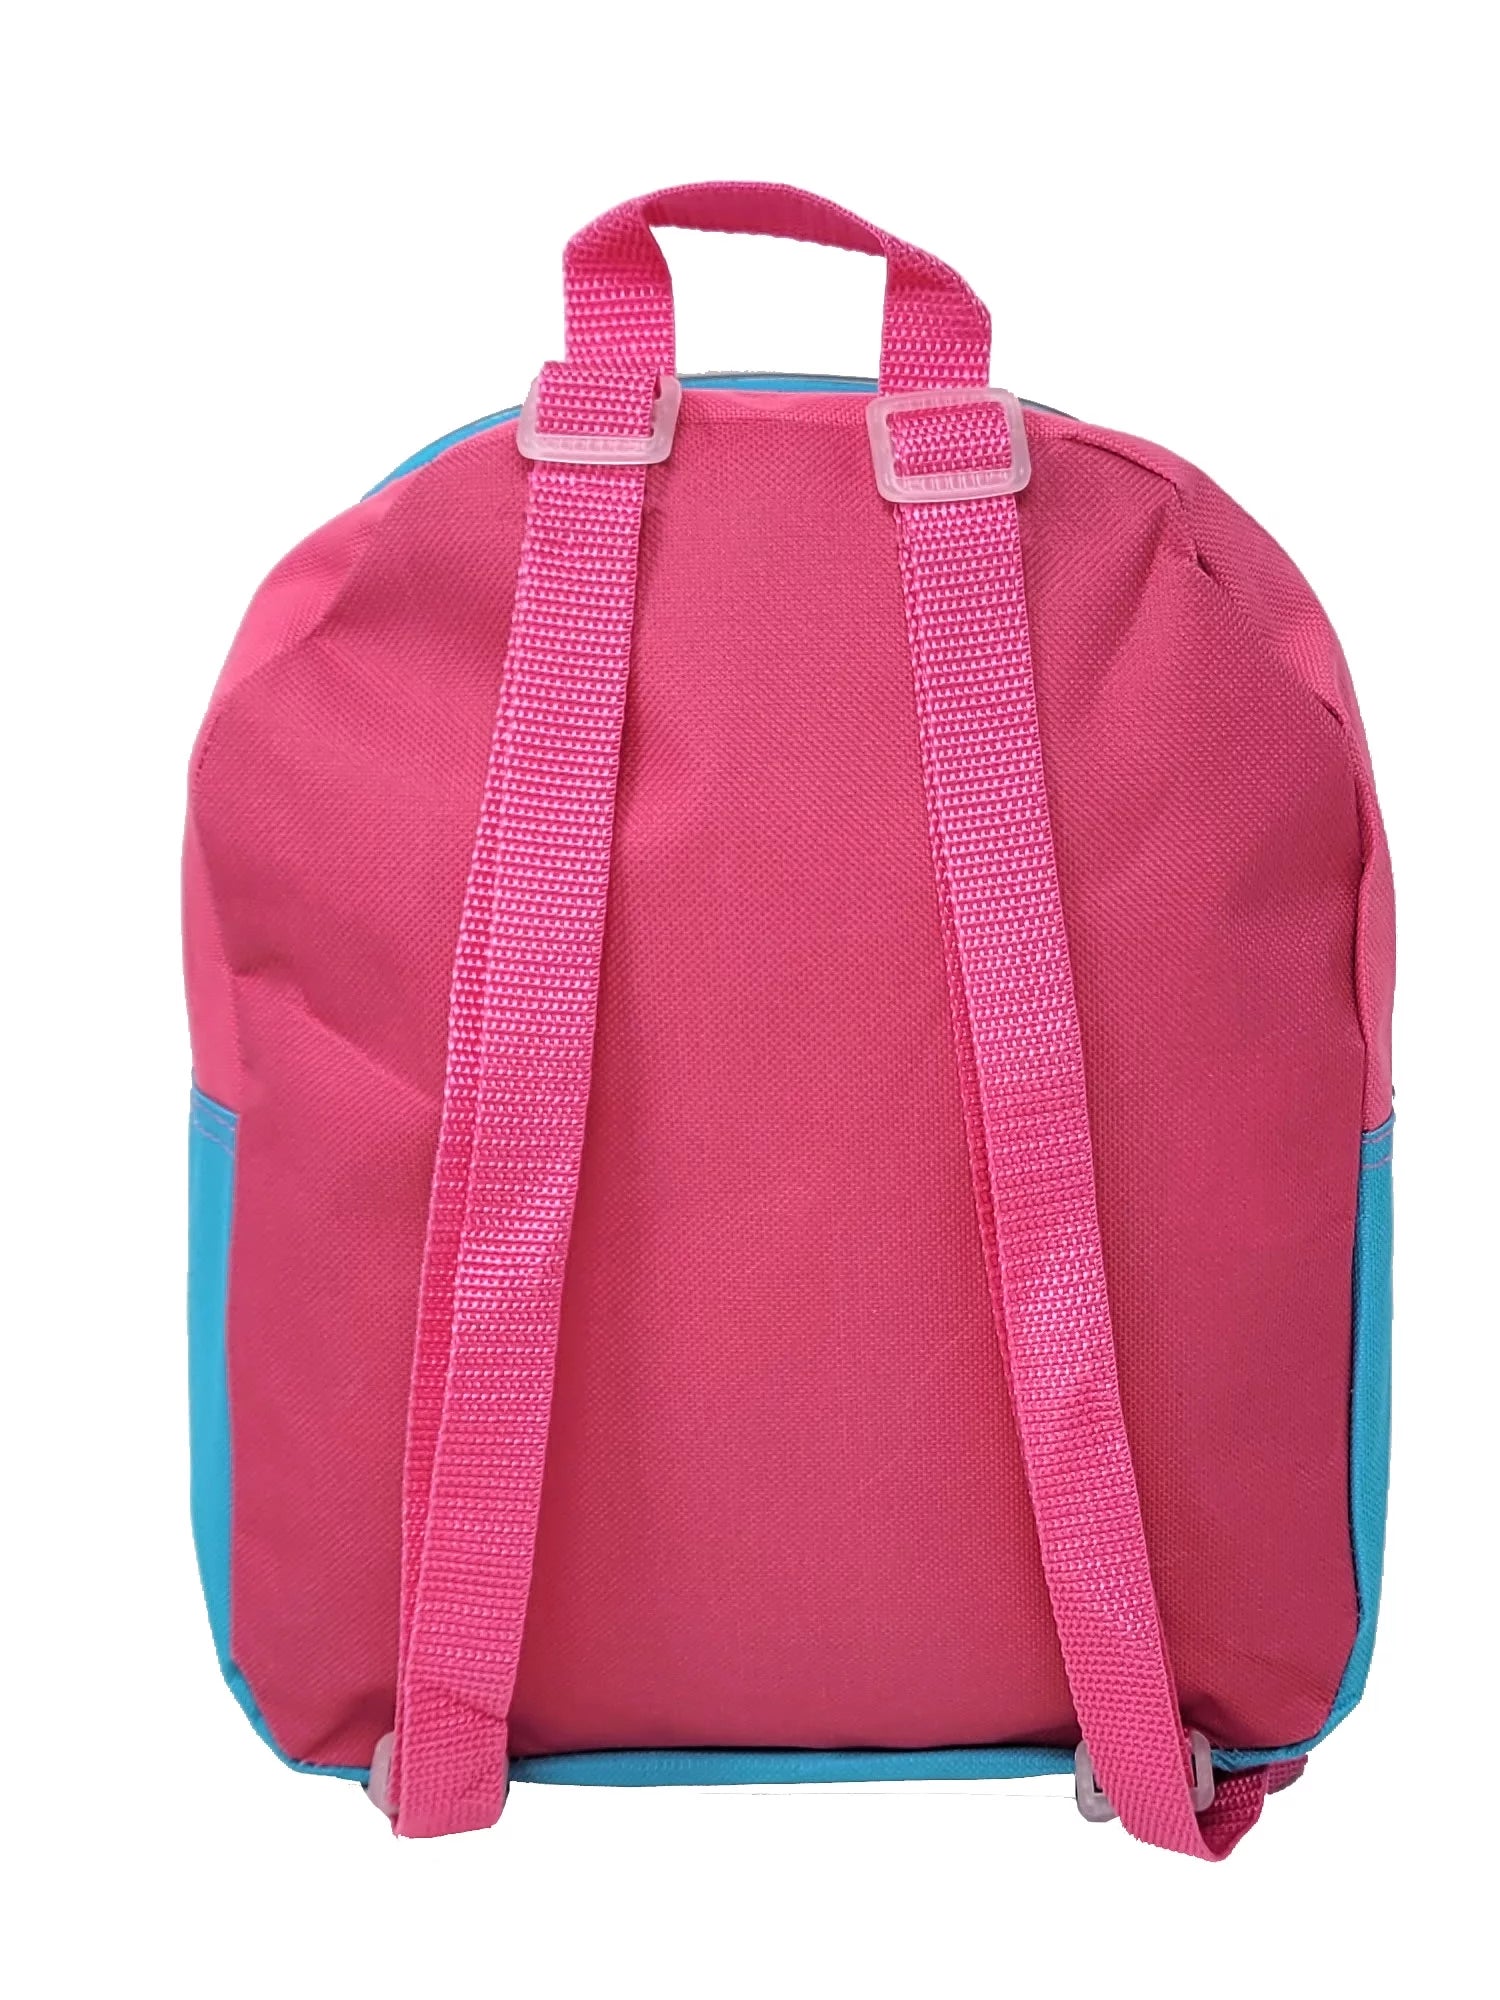 Backpack 11" Mini Toddler Sanrio Pink Teal Sweets Candy Girls Pink